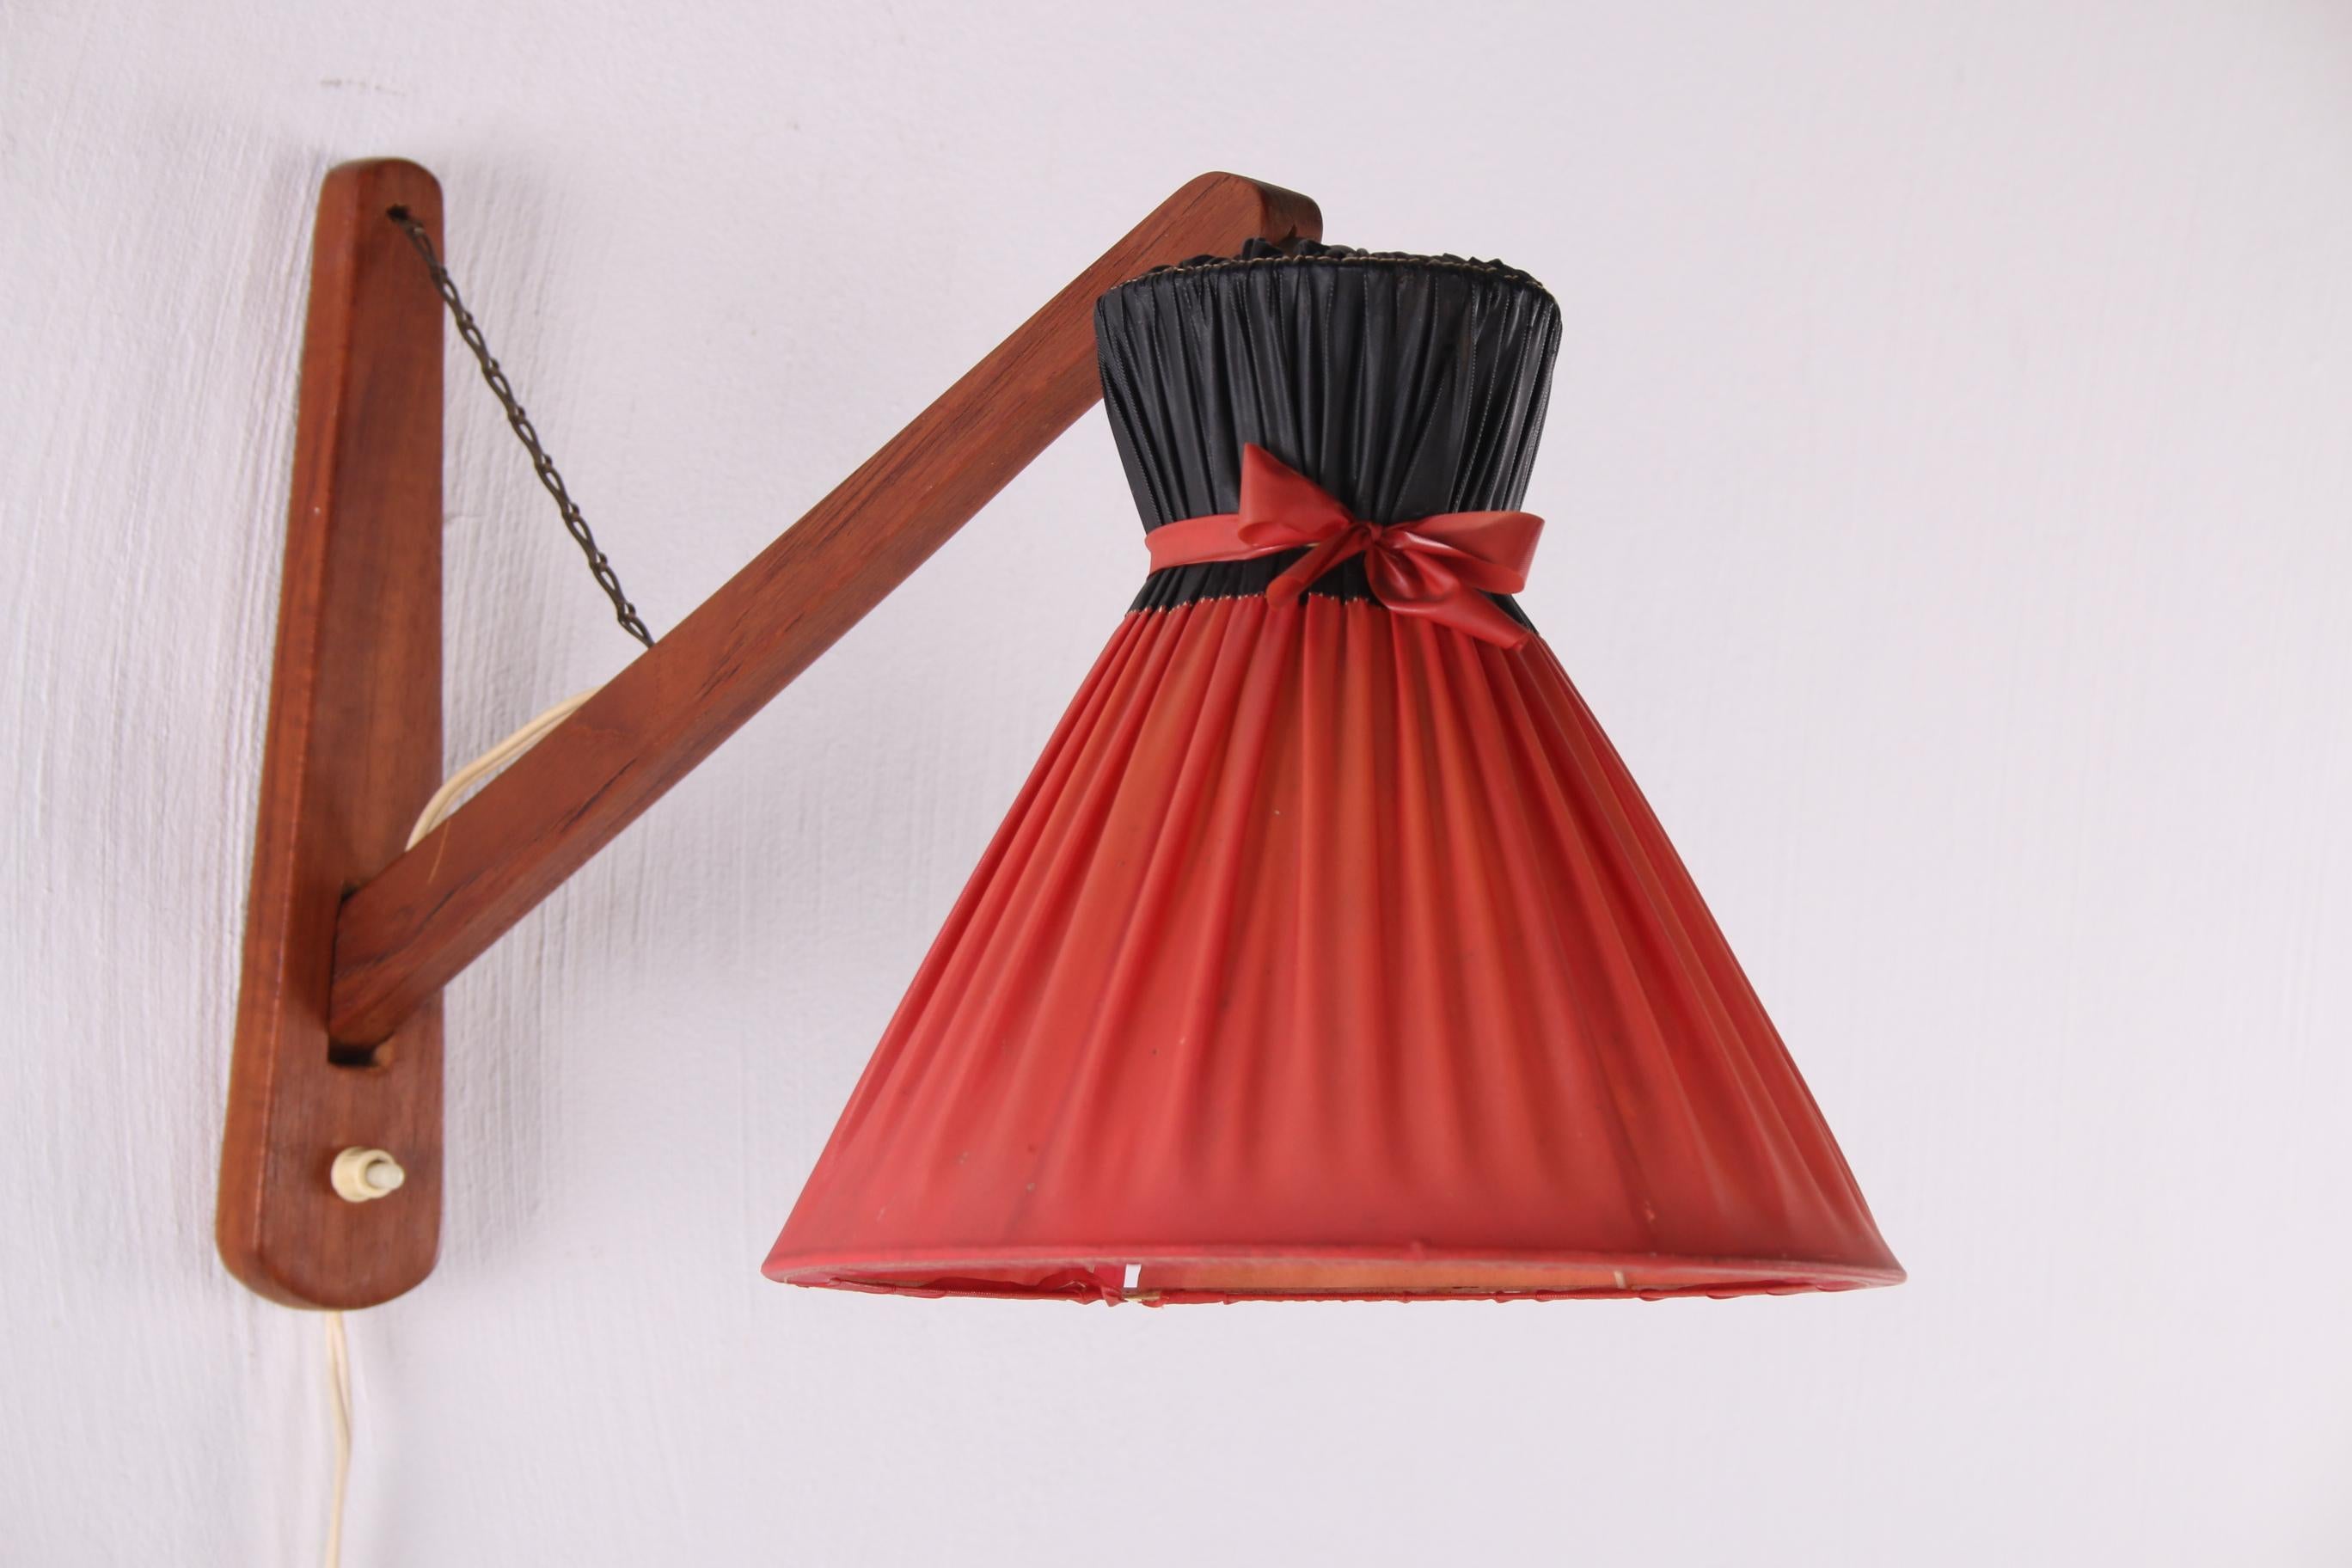 Danish Design Wall Lamp with Original Shade, 1960s For Sale 7